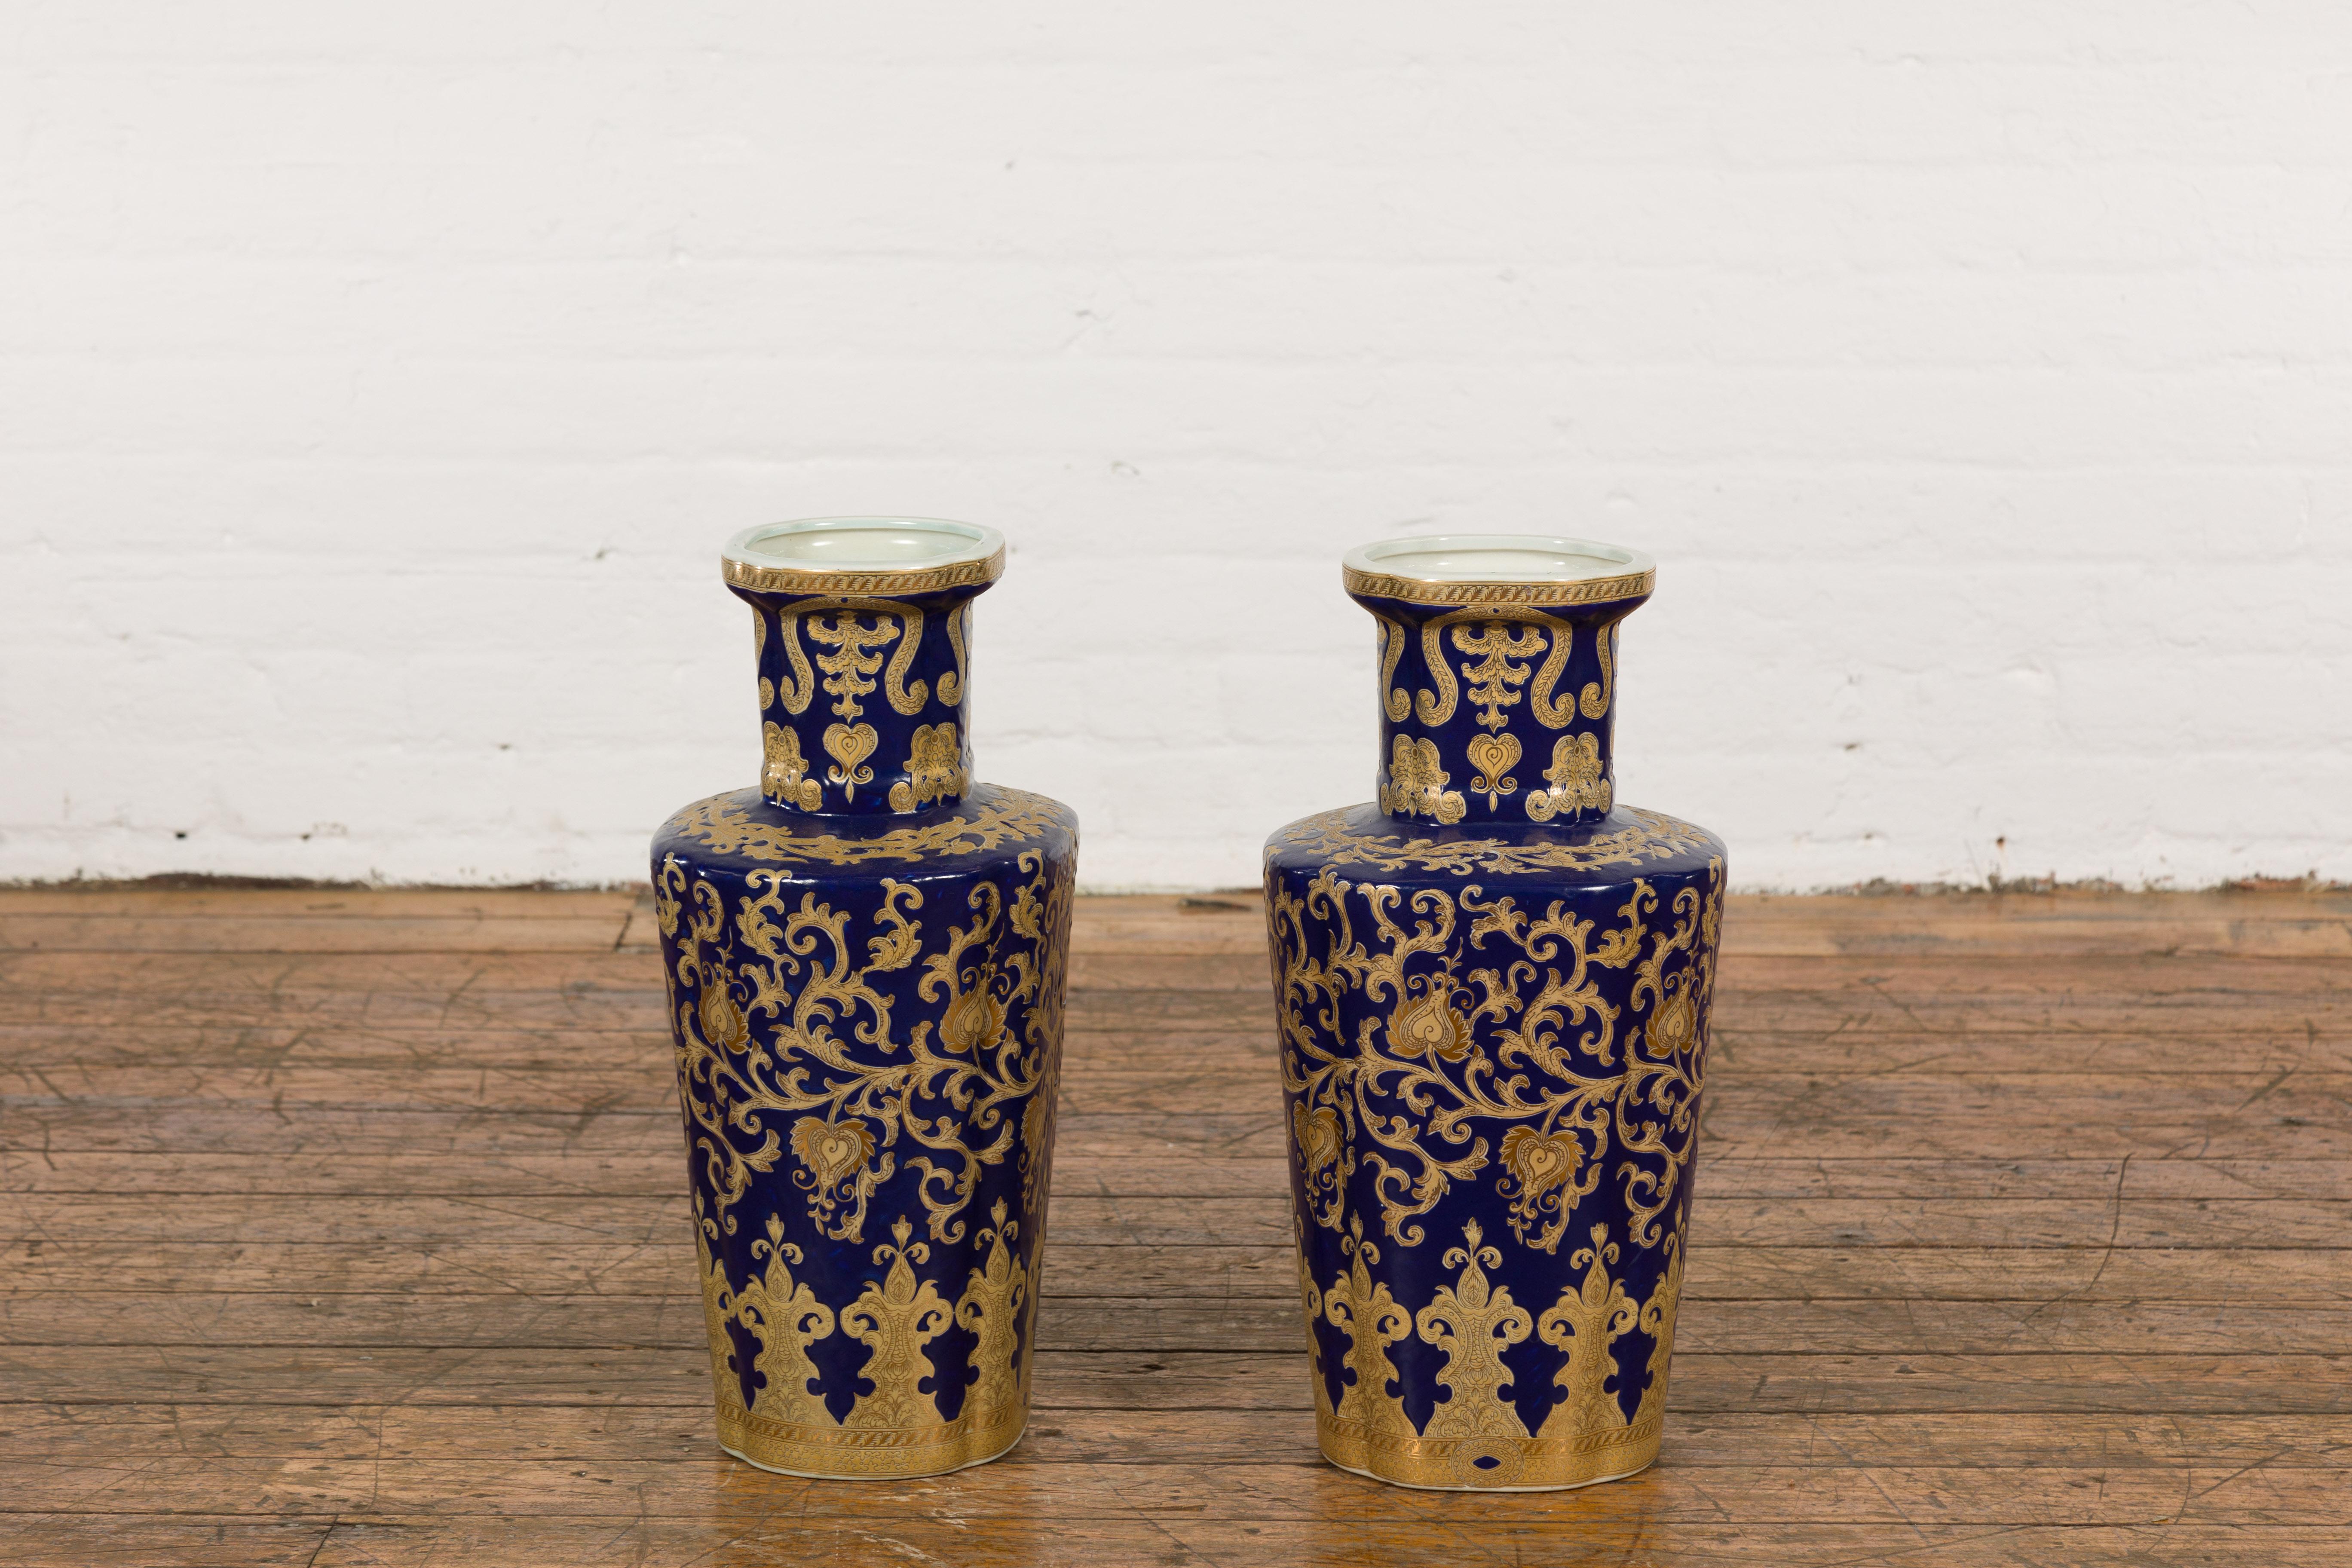 Pair of Dark Blue and Gold Vintage Vases with Intricate Design For Sale 6